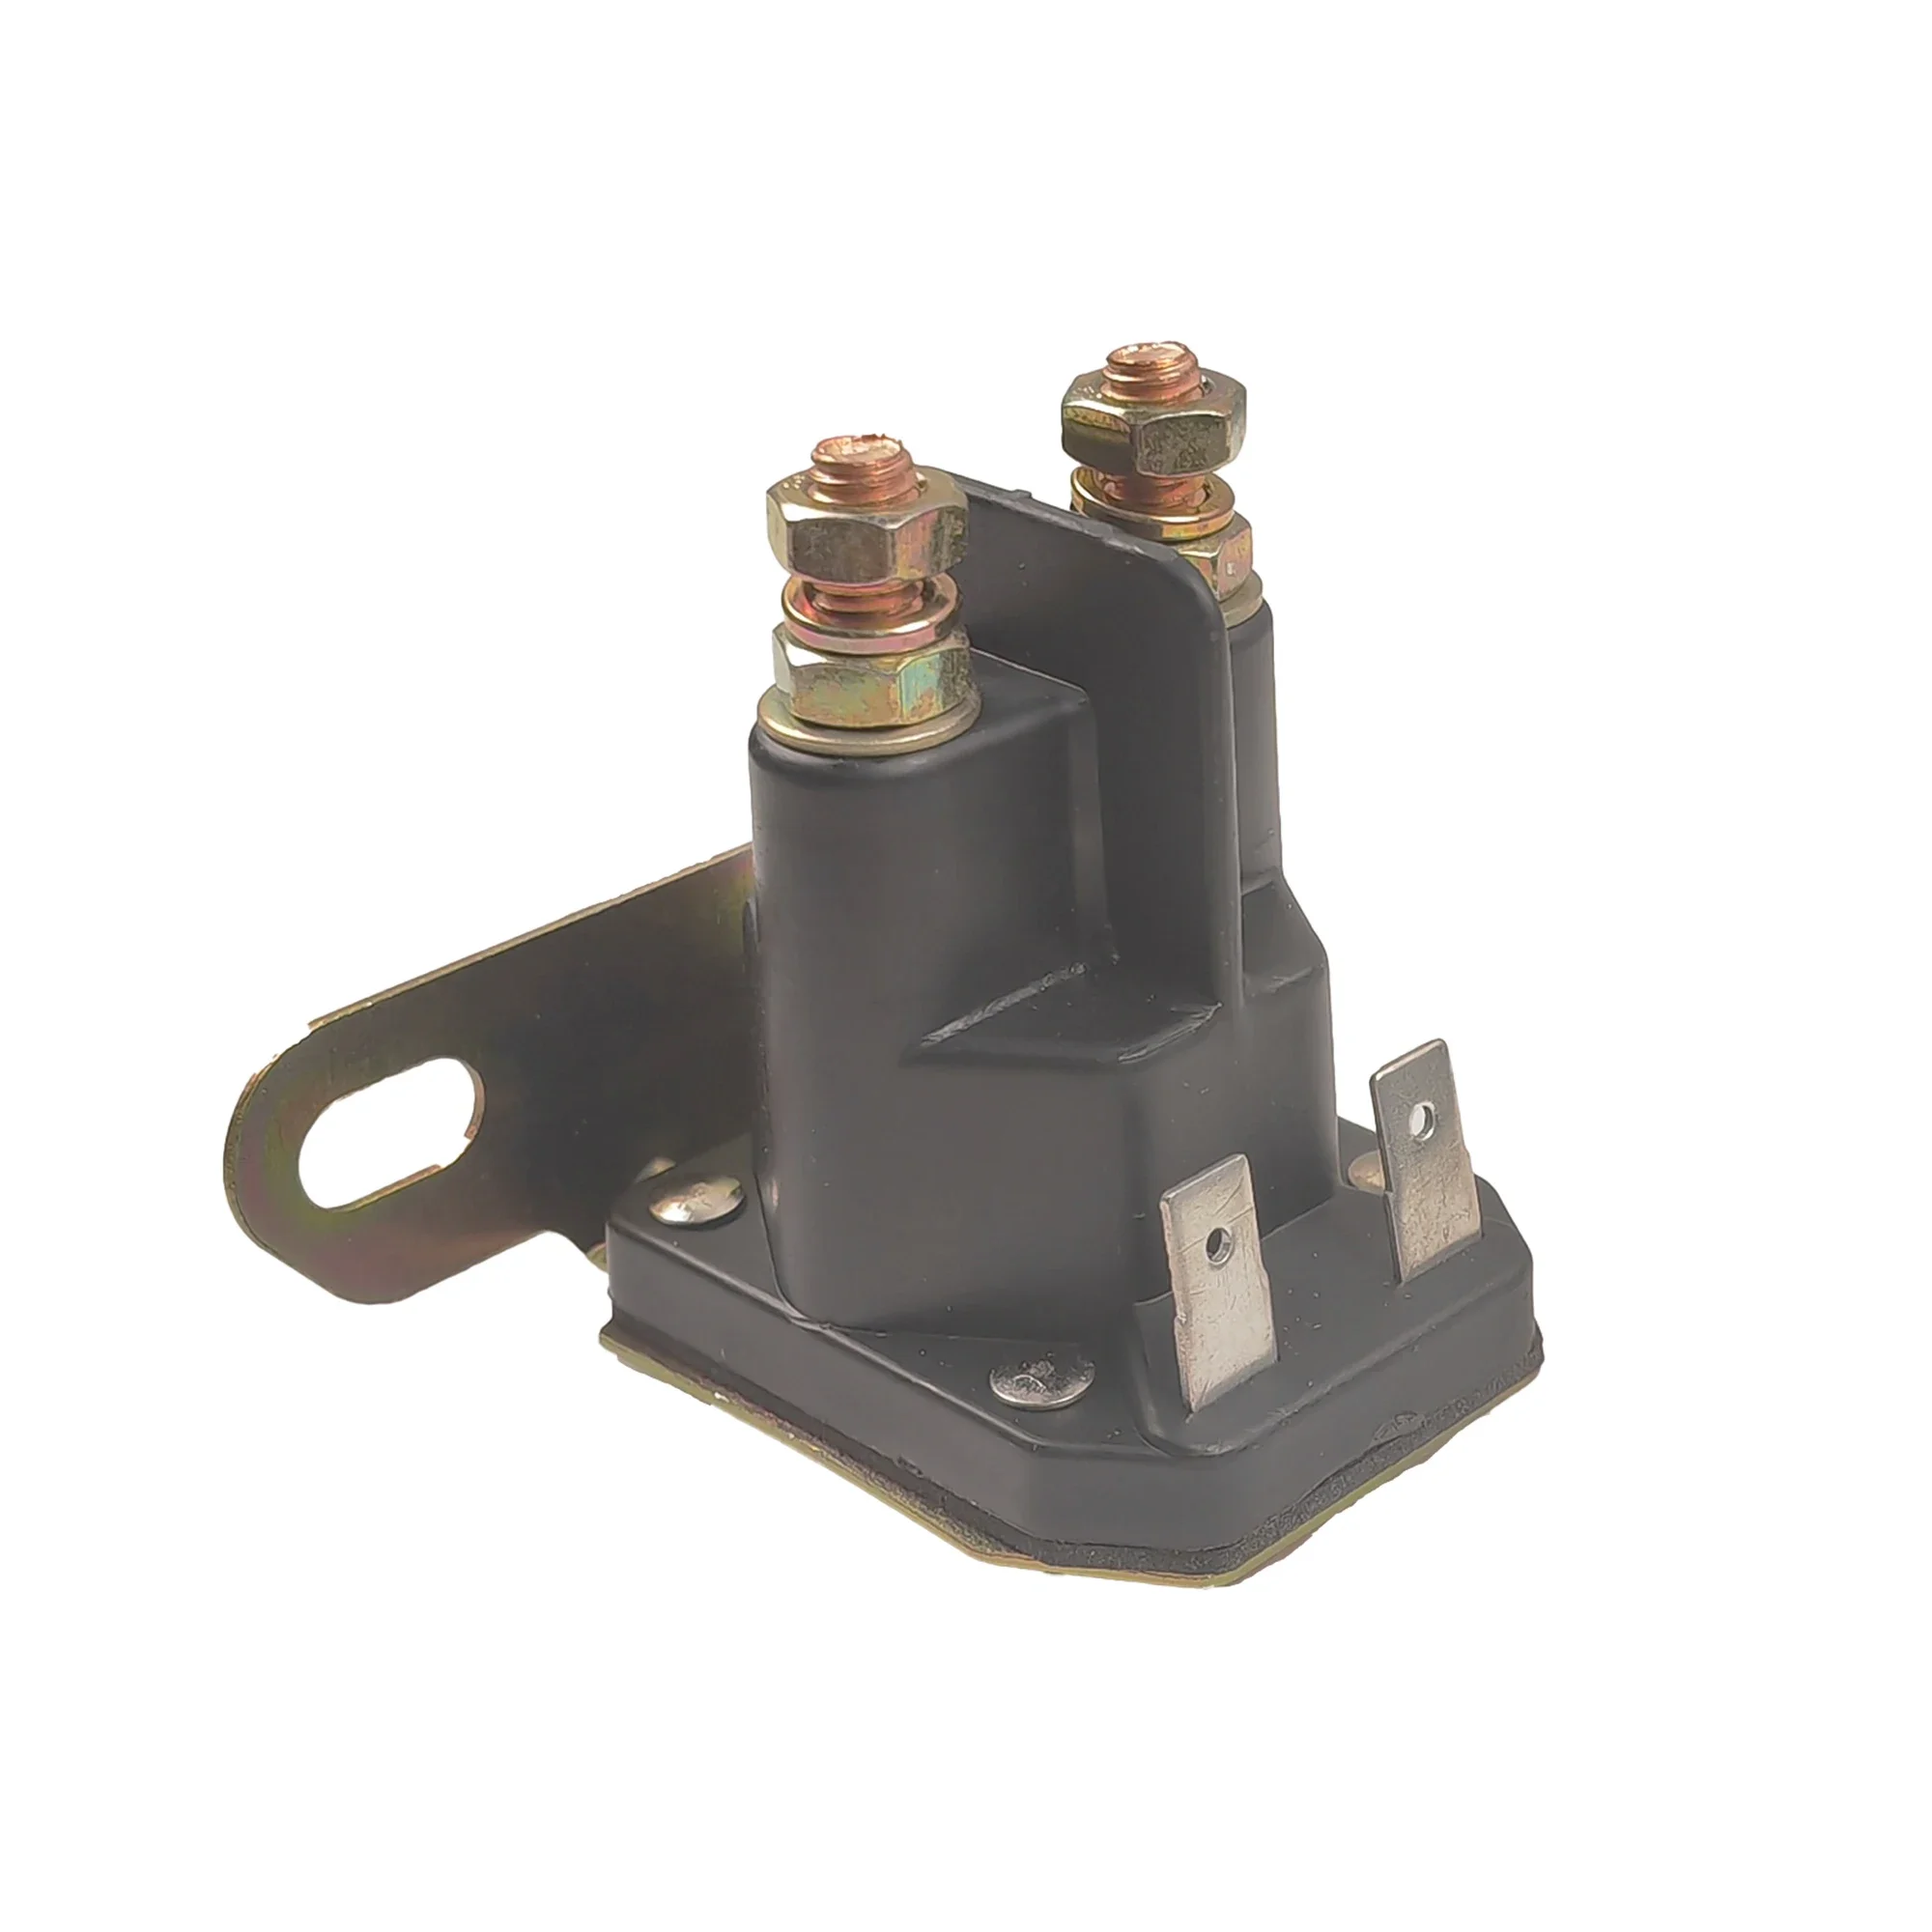 

WZYAFU Starter Relay Solenoid for 862-1211-211-16 AM138068 725-04439 Replacement for John Deere MTD Cub Cadet Lawn Tractor